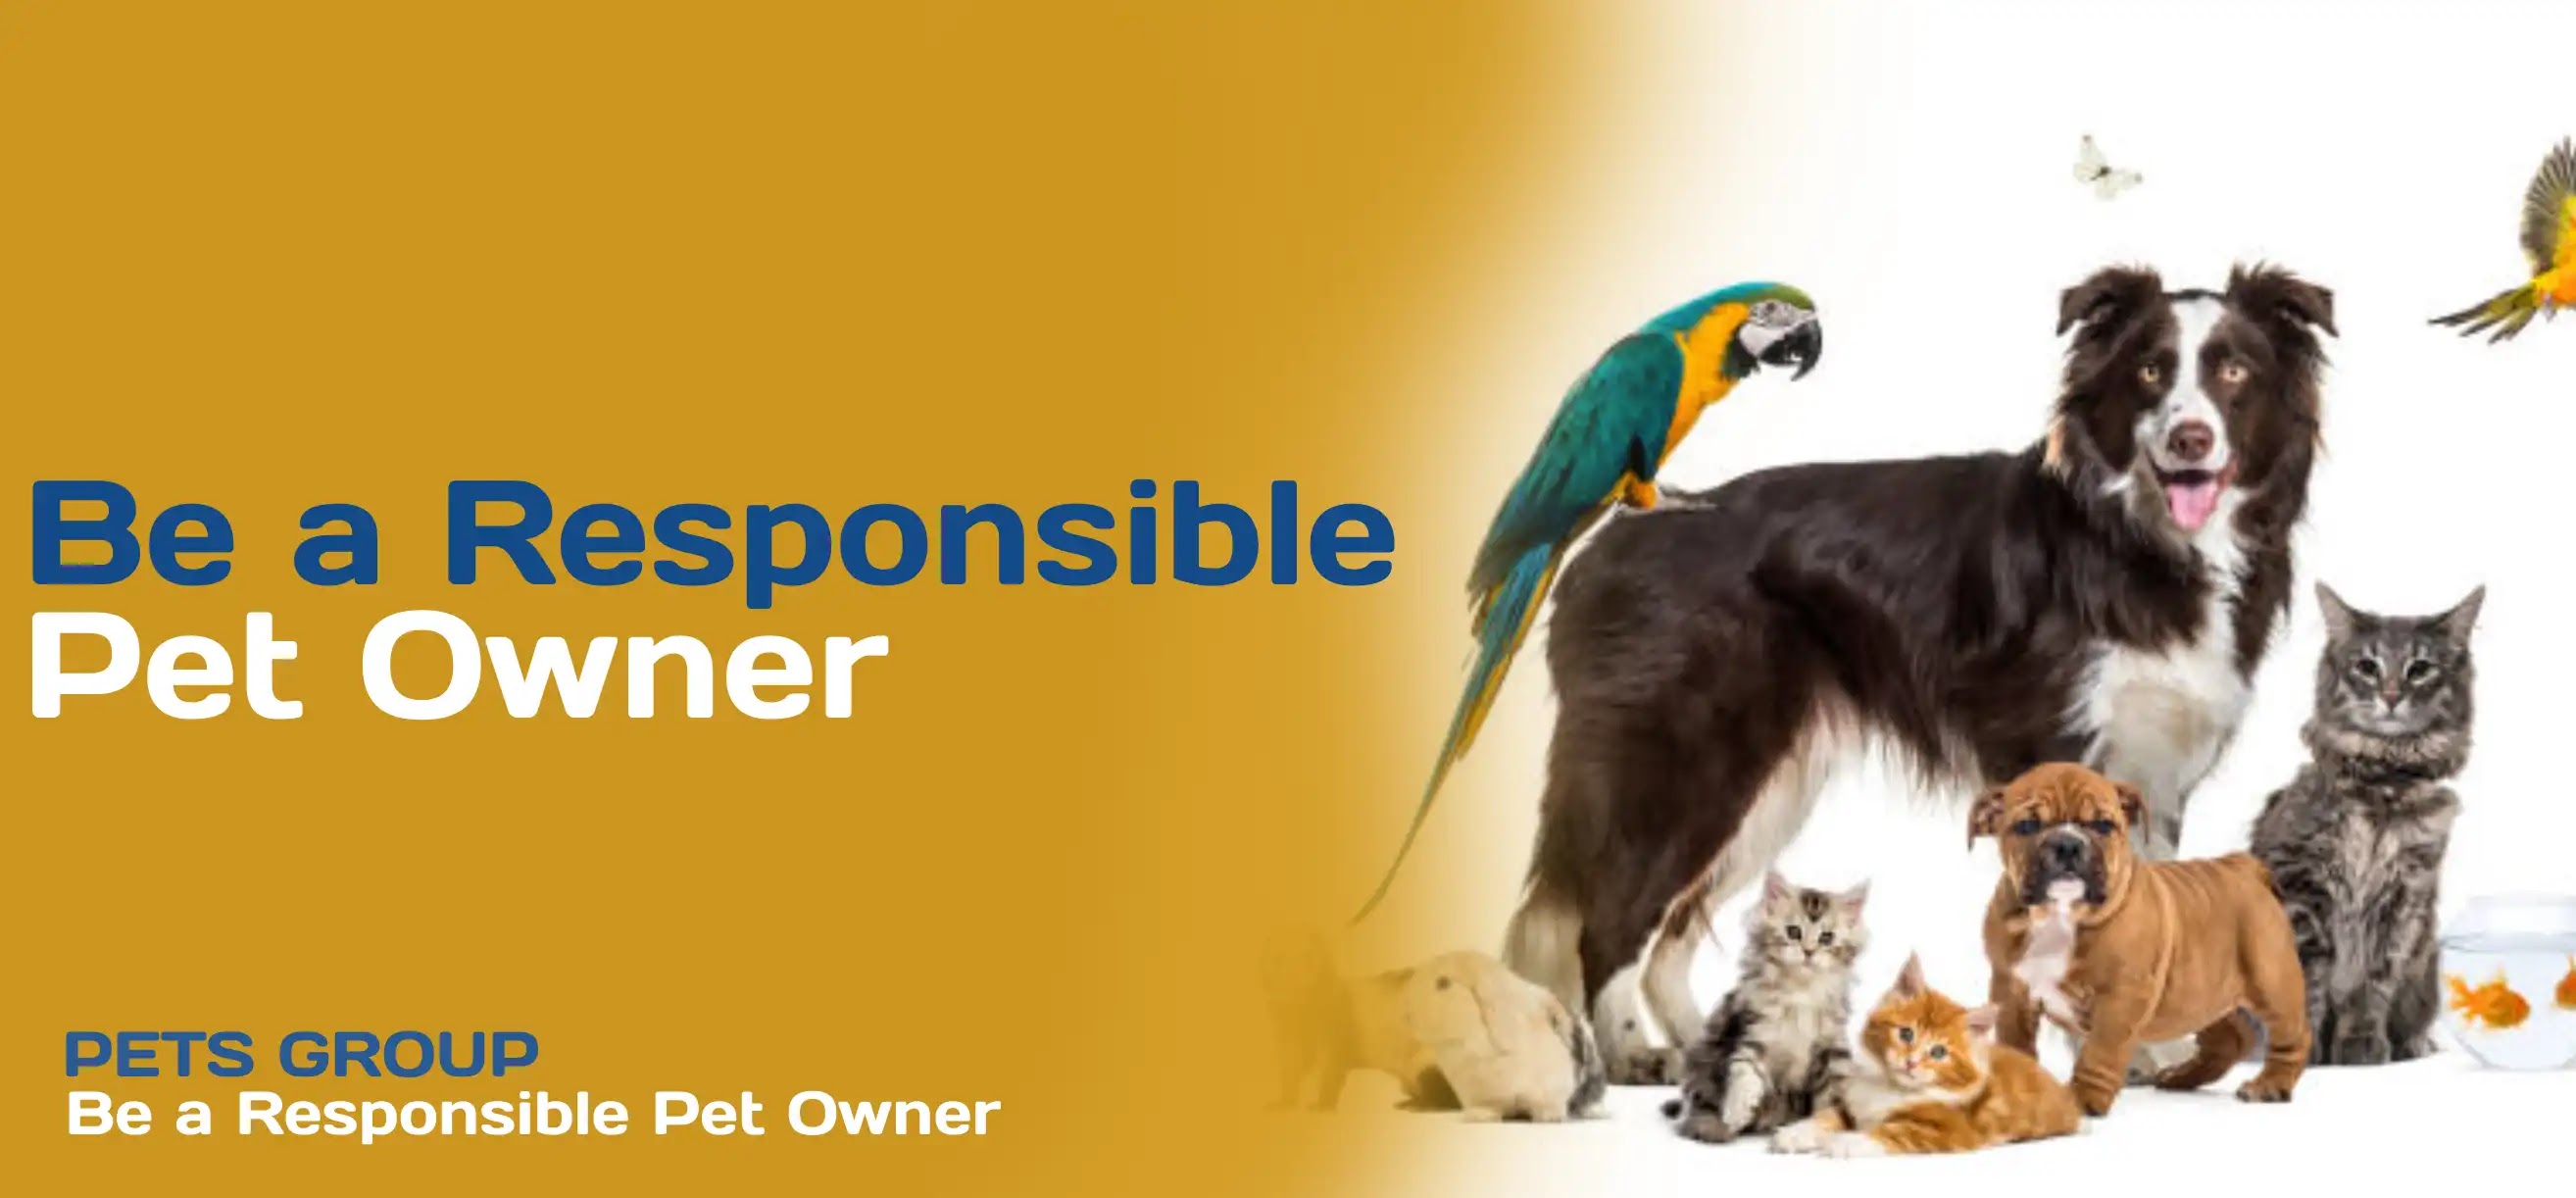 Be a Responsible Pet Owner